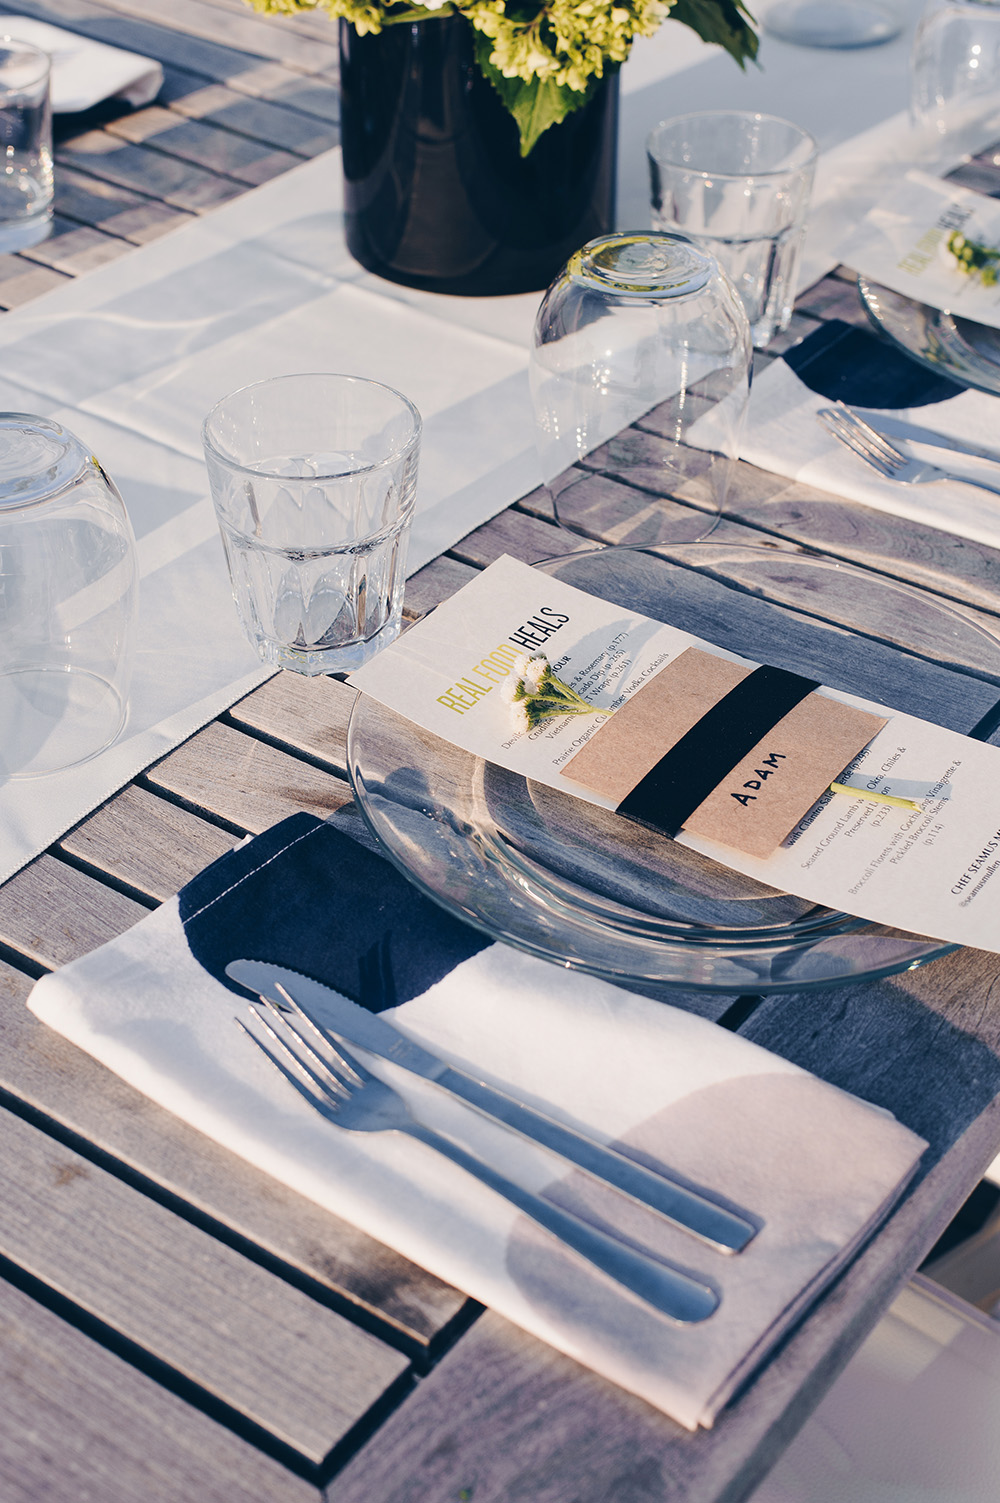 Rooftop dinner place setting with menu by Seamus Mullen